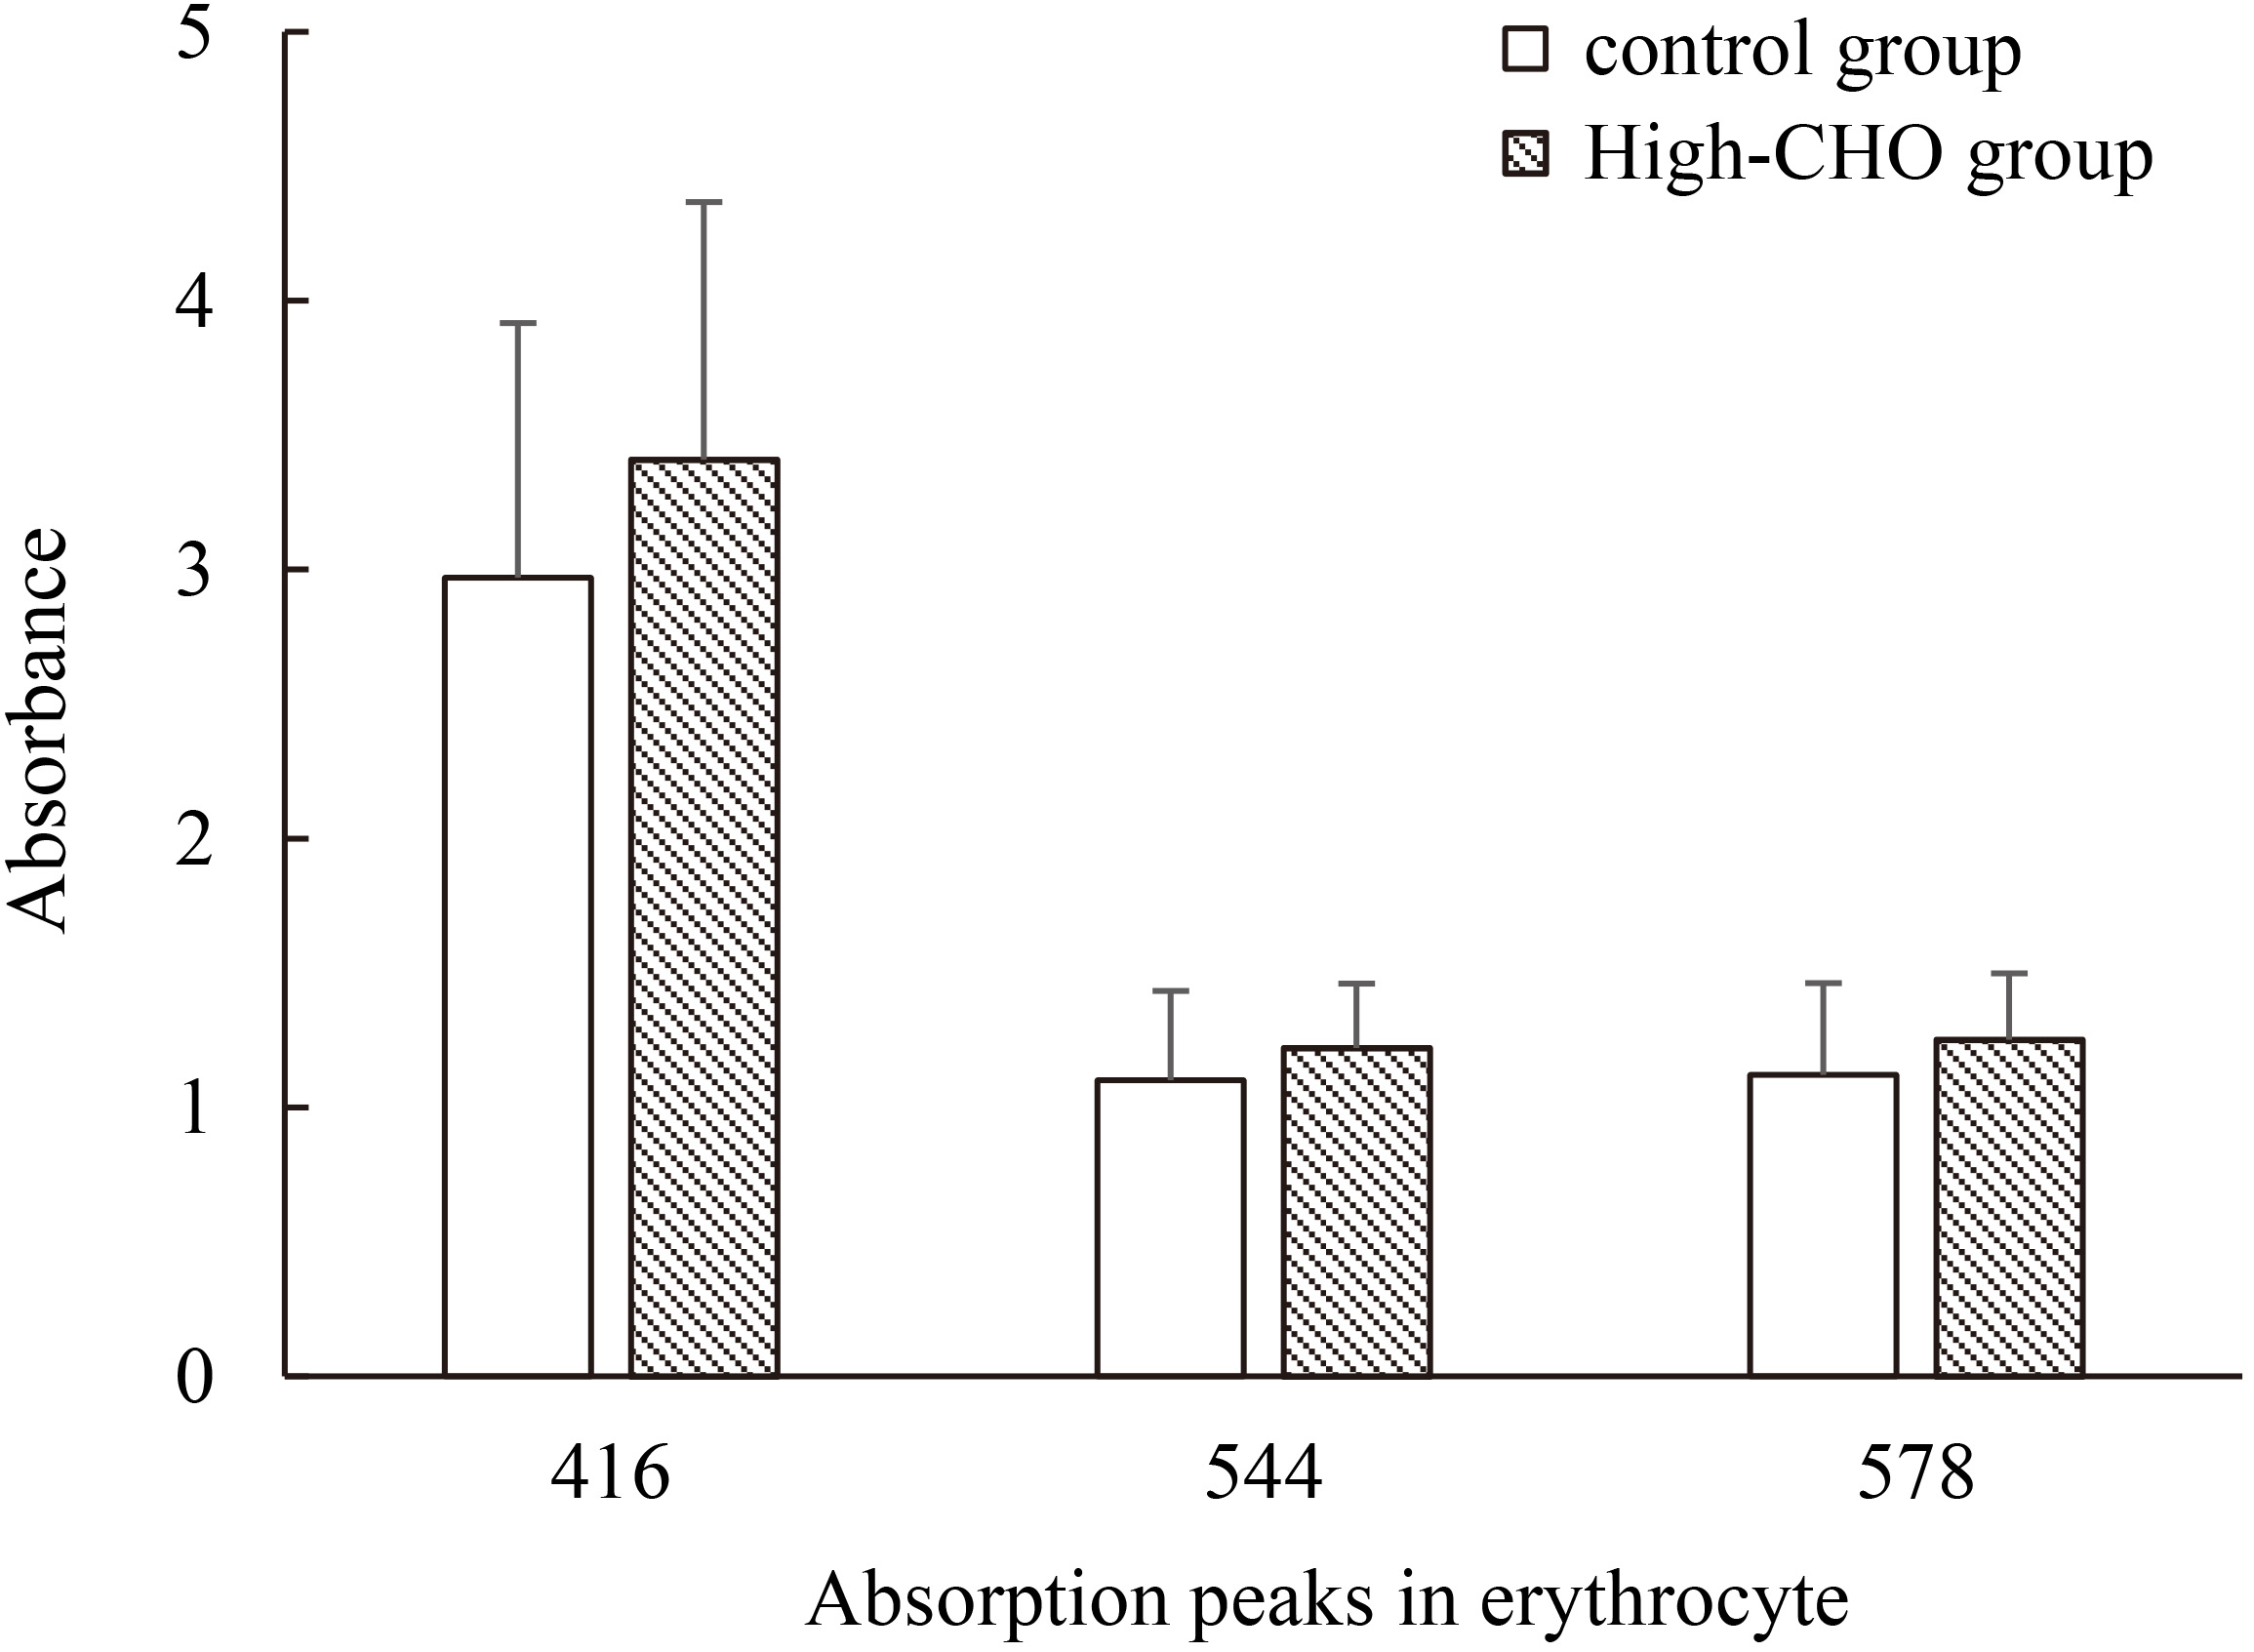 Main absorption peaks (416 nm, 544 nm, 578 nm) from erythrocyte sample in hyperlipidemia and control groups.